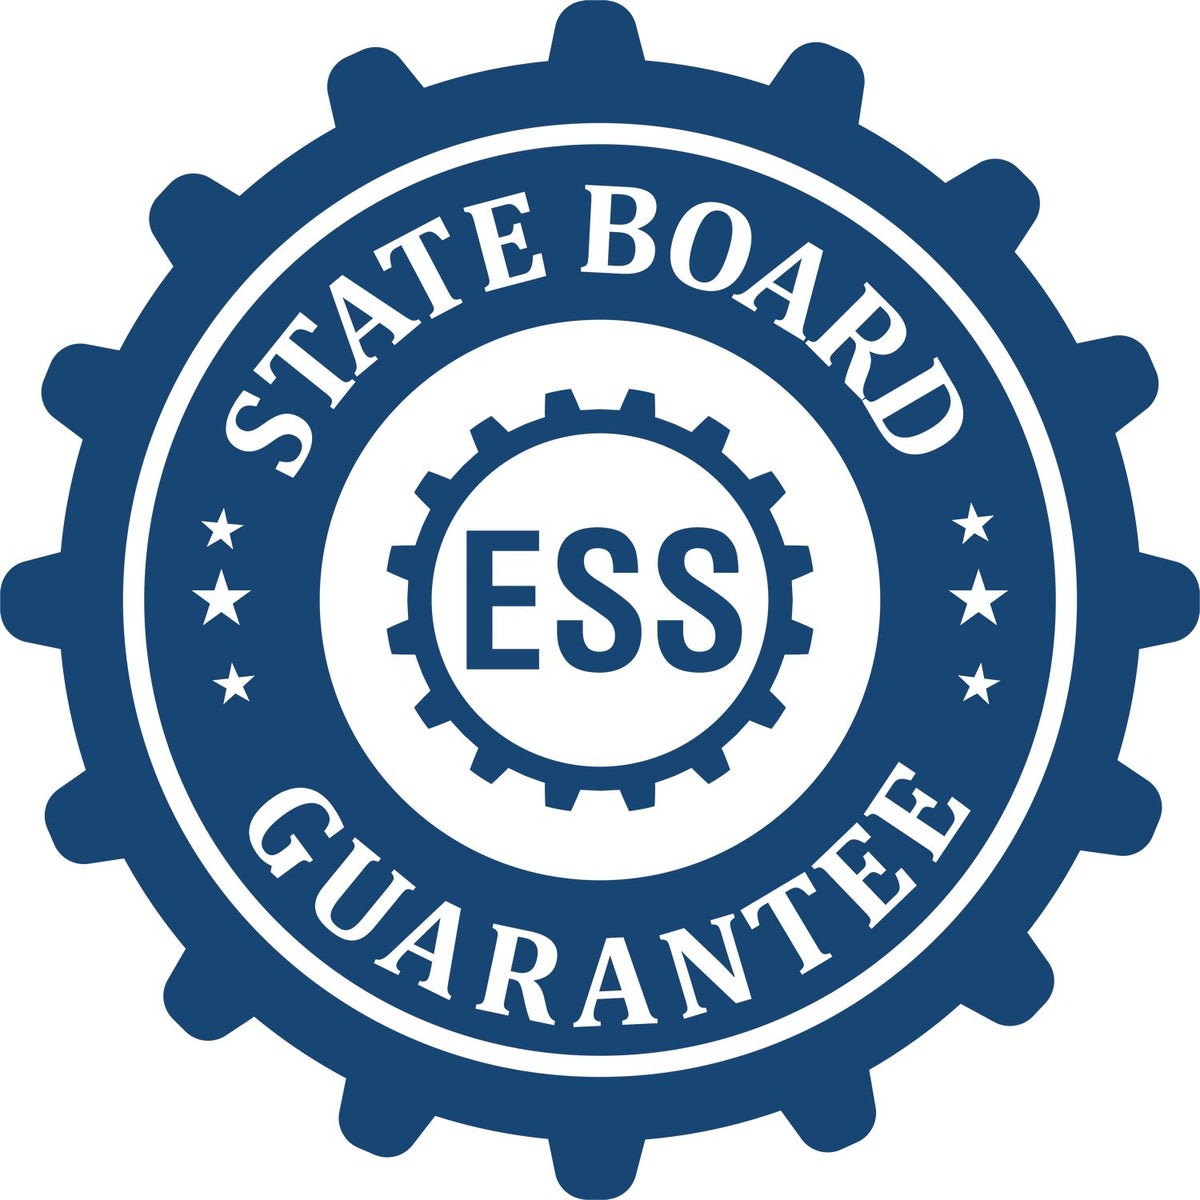 An emblem in a gear shape illustrating a state board guarantee for the Premium MaxLight Pre-Inked Pennsylvania Landscape Architectural Stamp product.